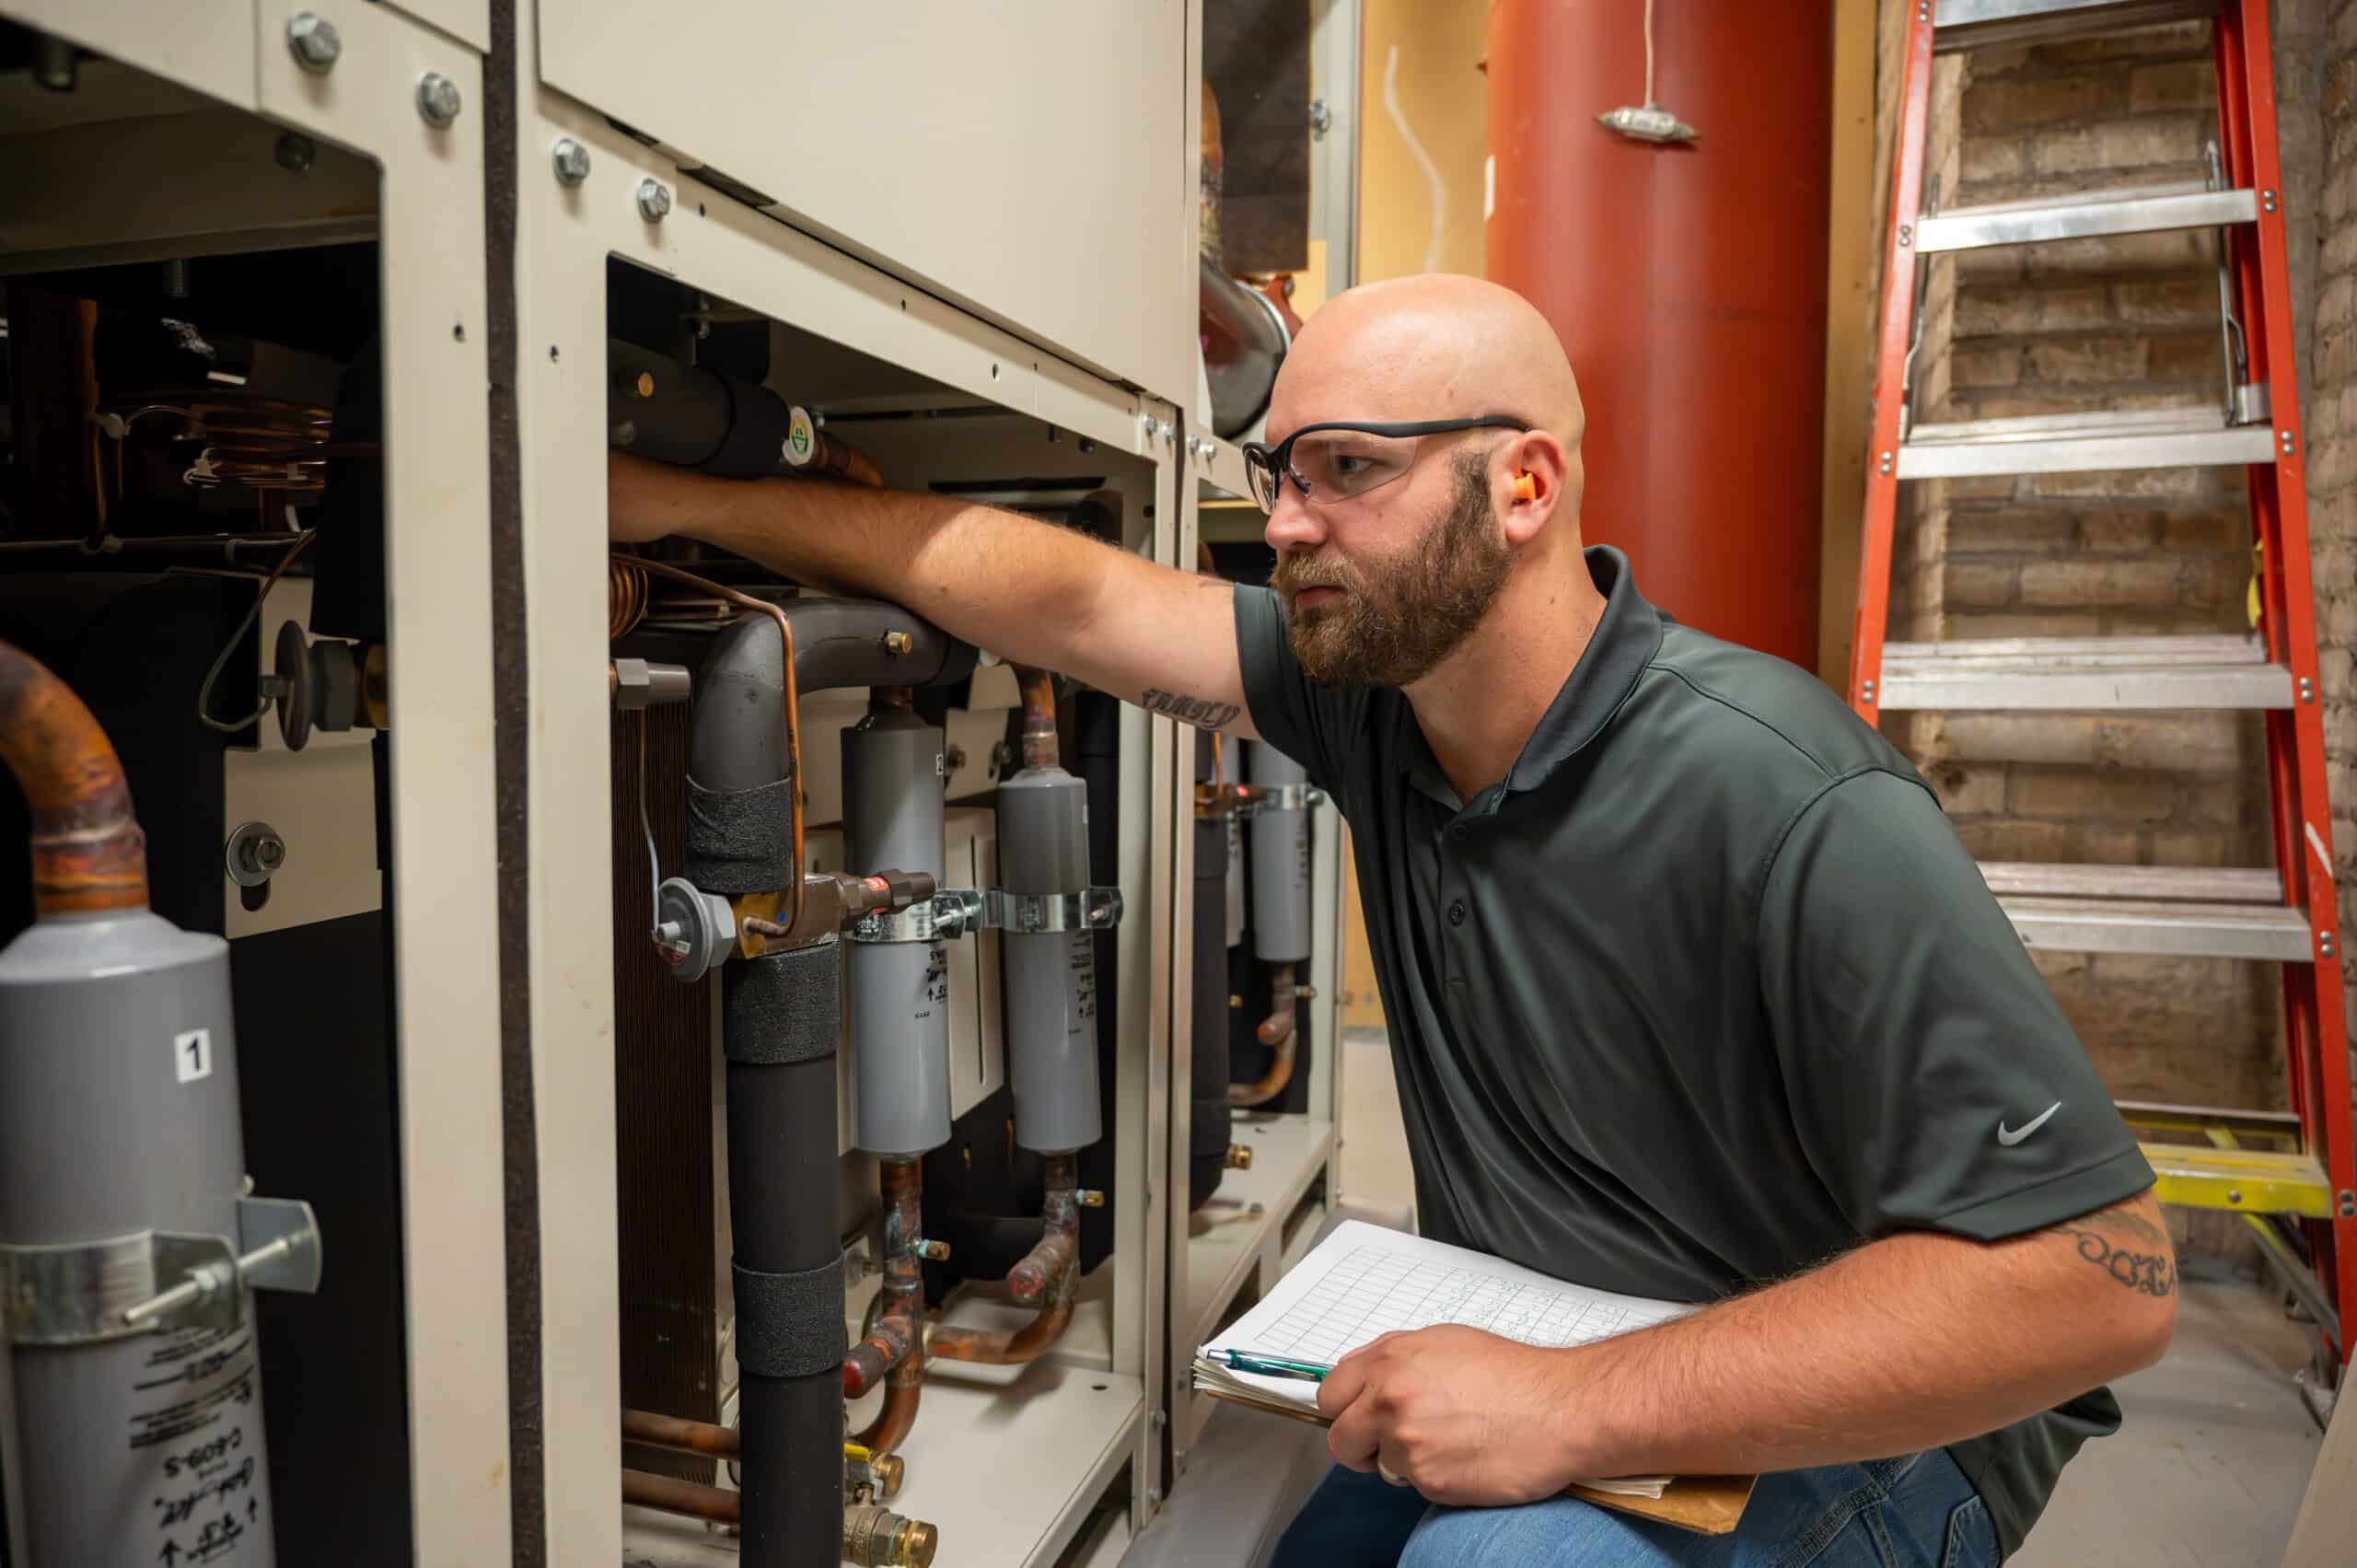 Image of Josh Yates, Chief Building Engineer for McGough, working on equipment